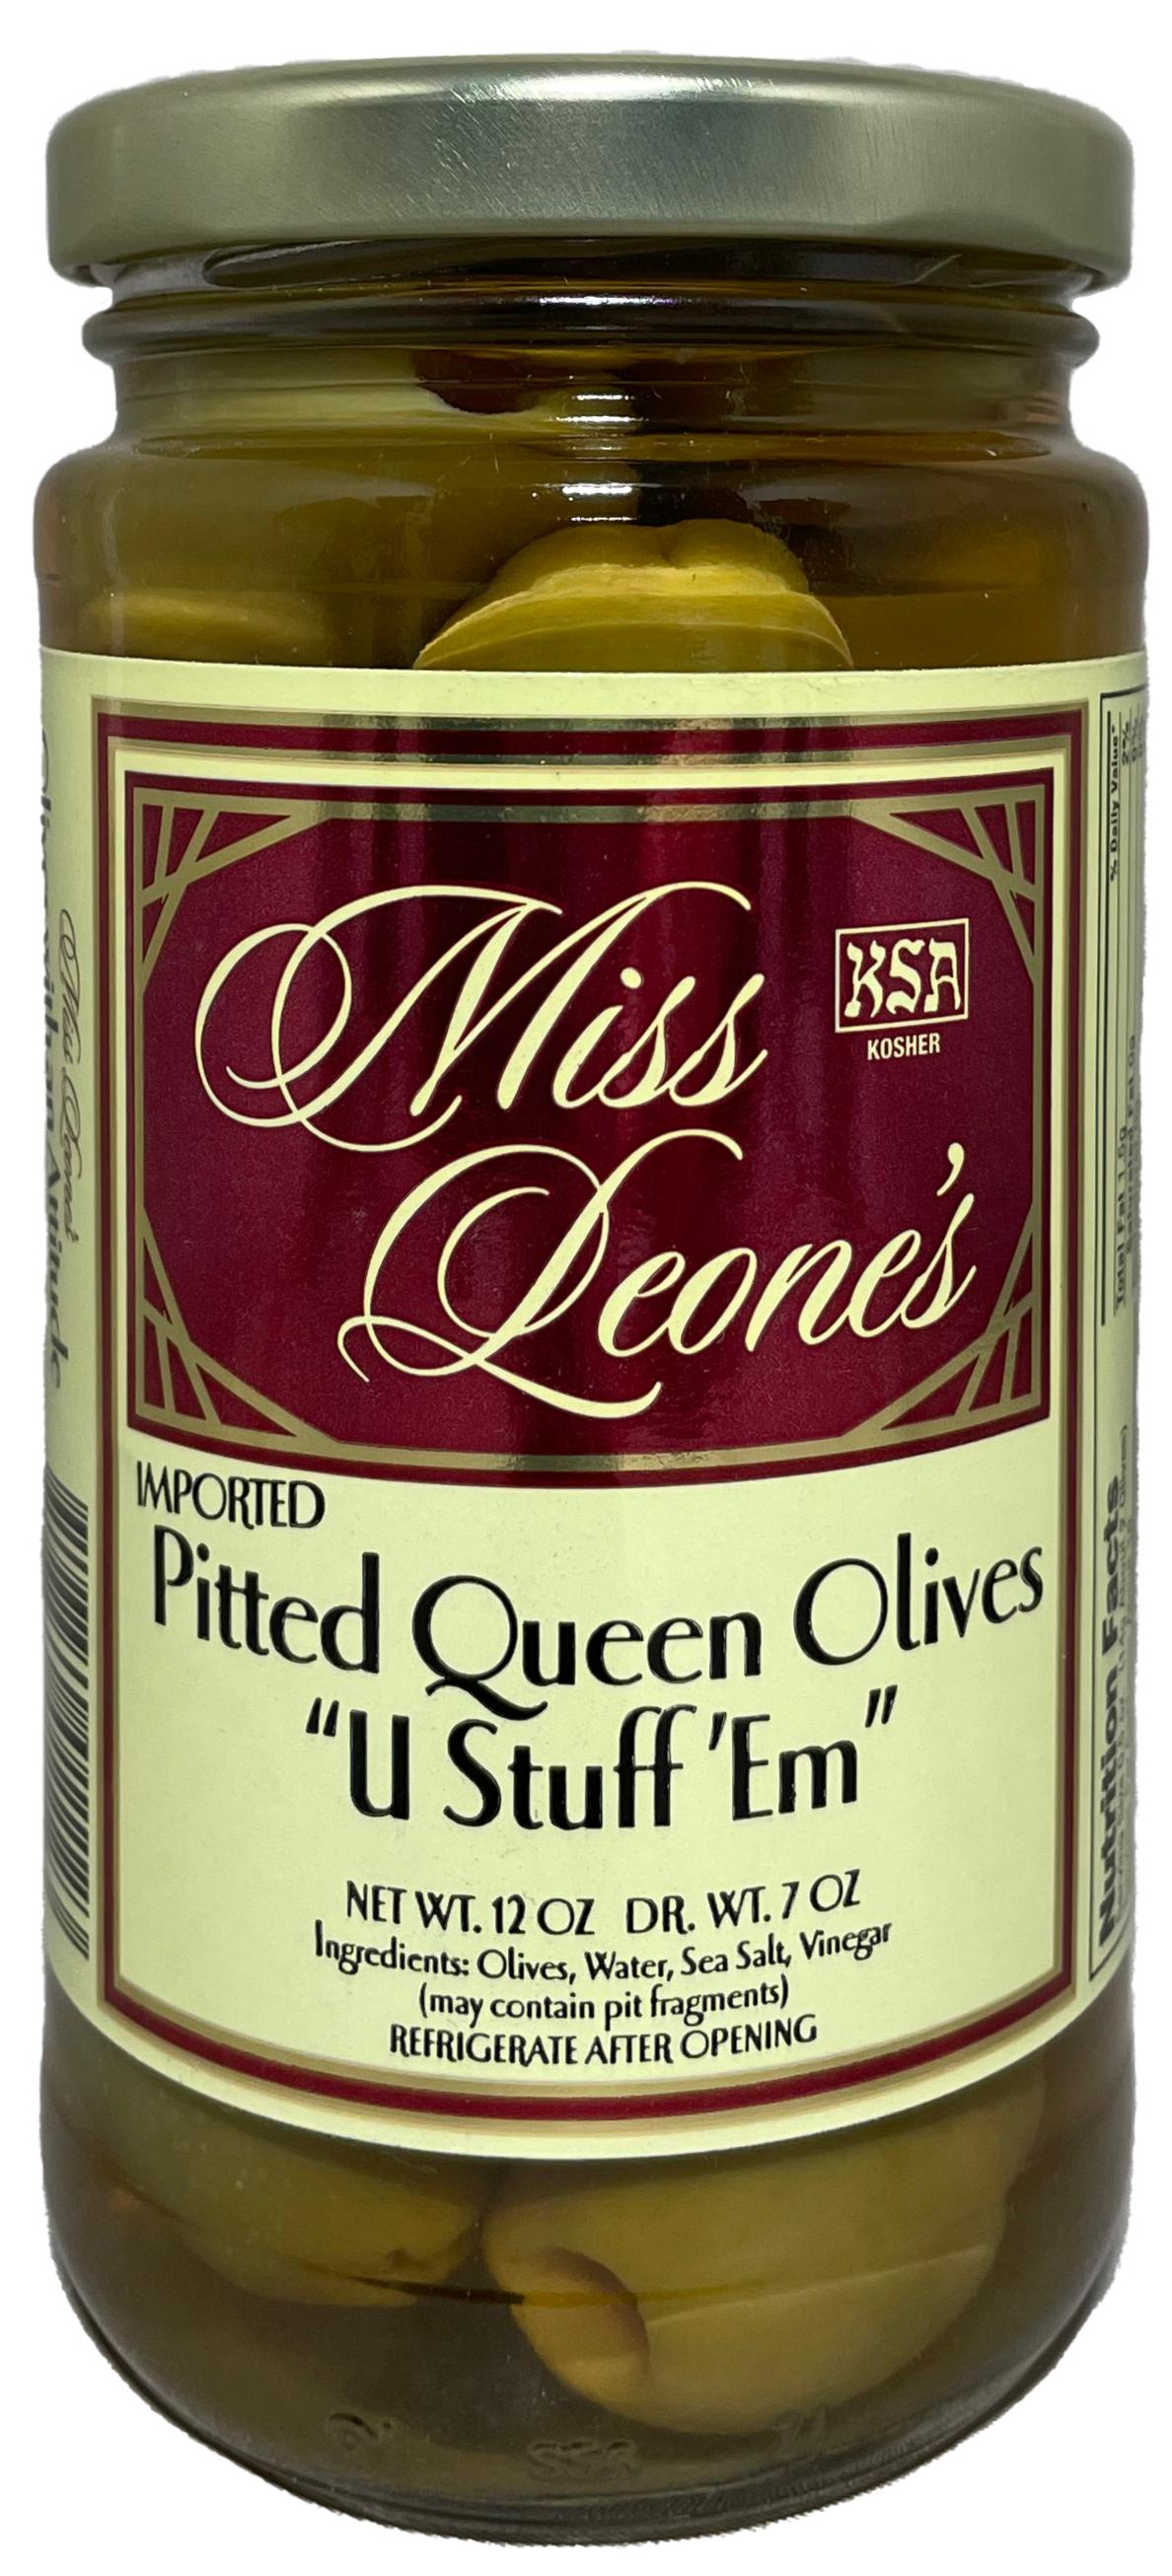 U Stuff 'Em Pitted Queen Olives *NEW LOWER PRICE*